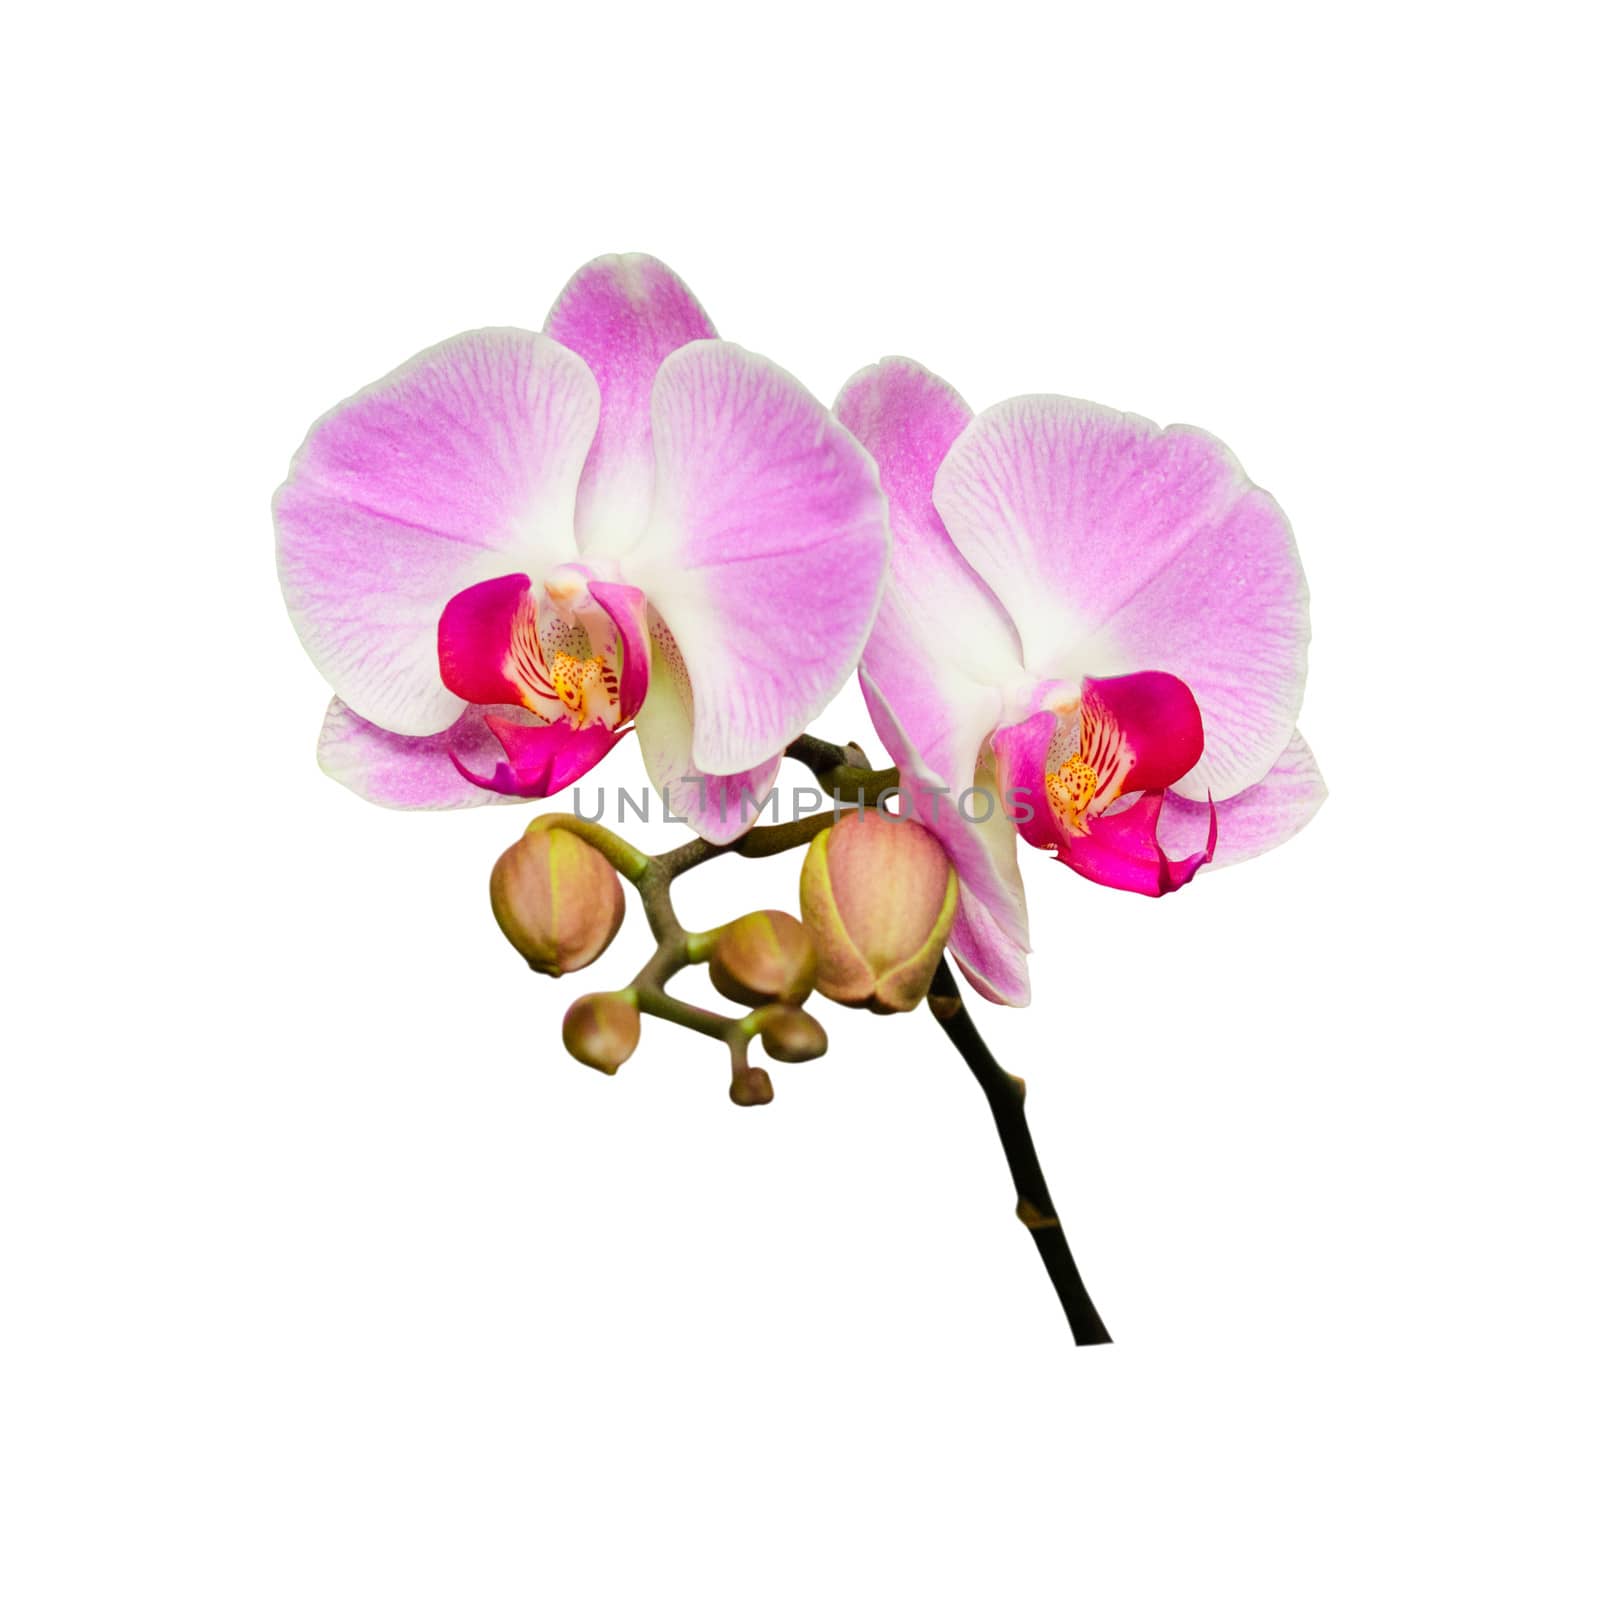 Small branch of violet orchids flowers with buds isolated